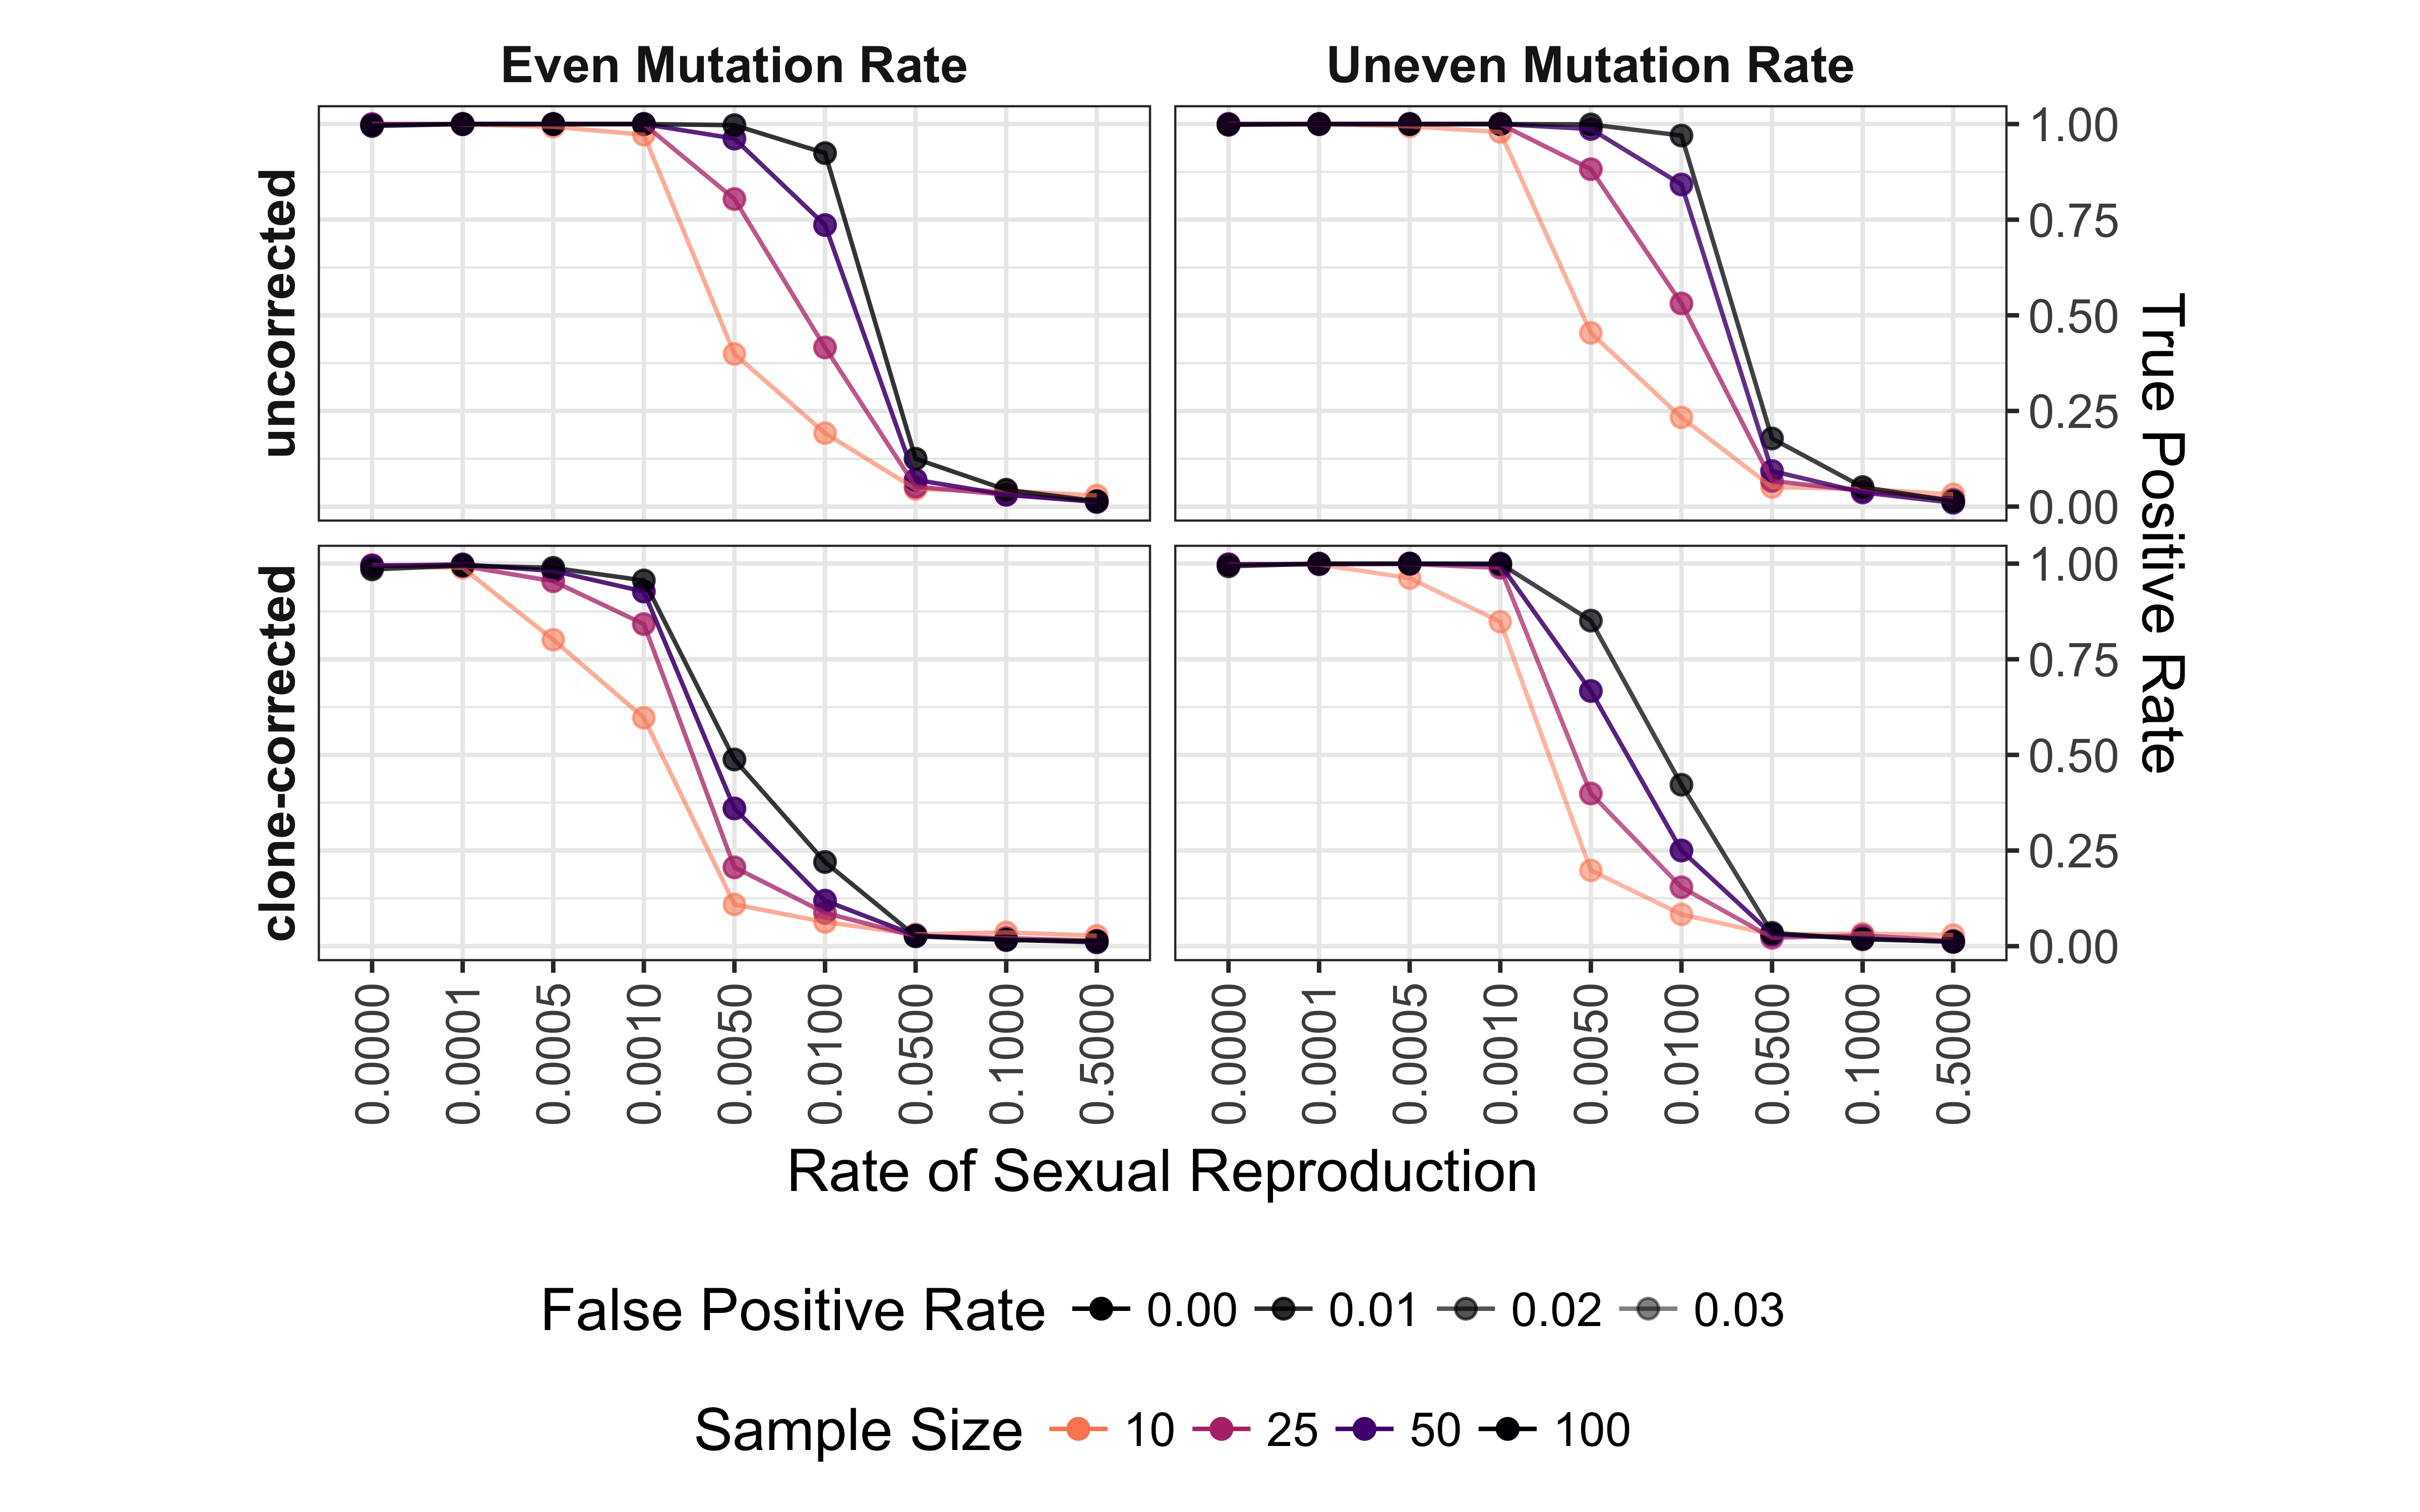 Effect of rate of sexual reproduction, sample size (n), mutation rate,
and clone-correction on the power of permutation analysis for
microsatellite data taking into account allelic evenness. Plots are
arranged in a grid with clone-correction in rows and mutation rate in
columns. Values are shown for $\alpha$ = 0.01 and $E_{5A} \geq 0.85$